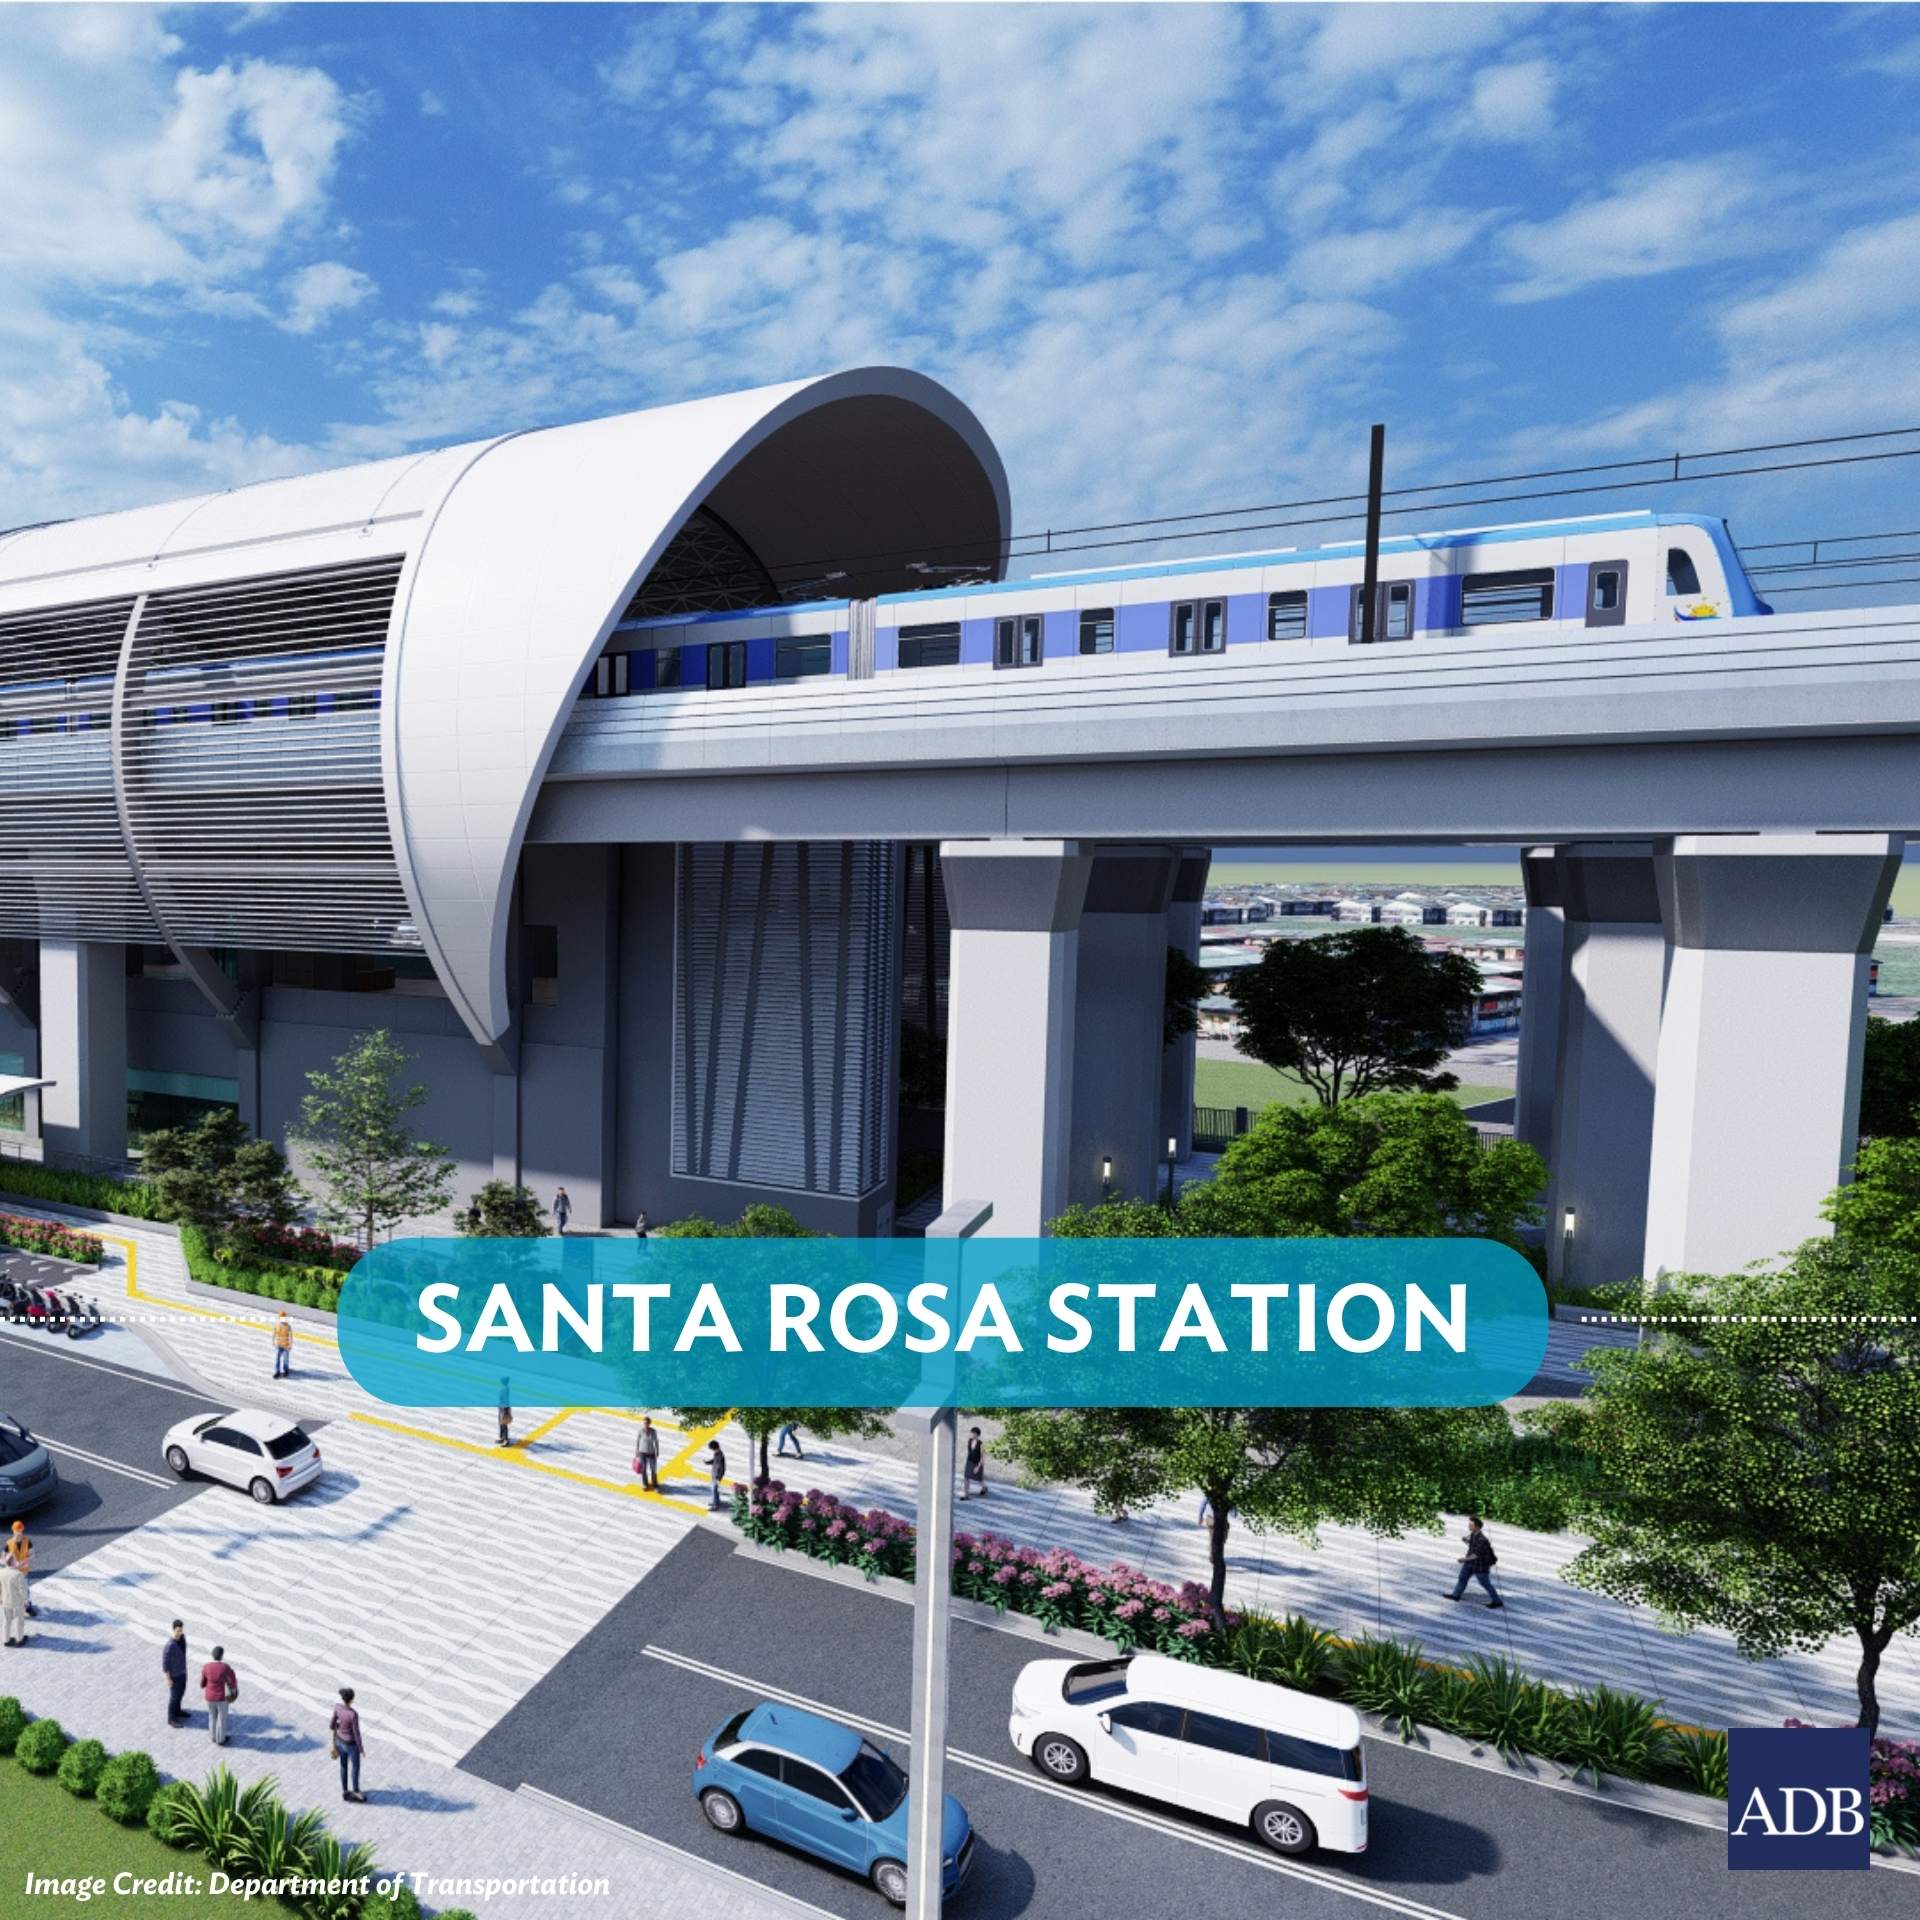 ADB shows renderings of South Commuter Railway stations 6